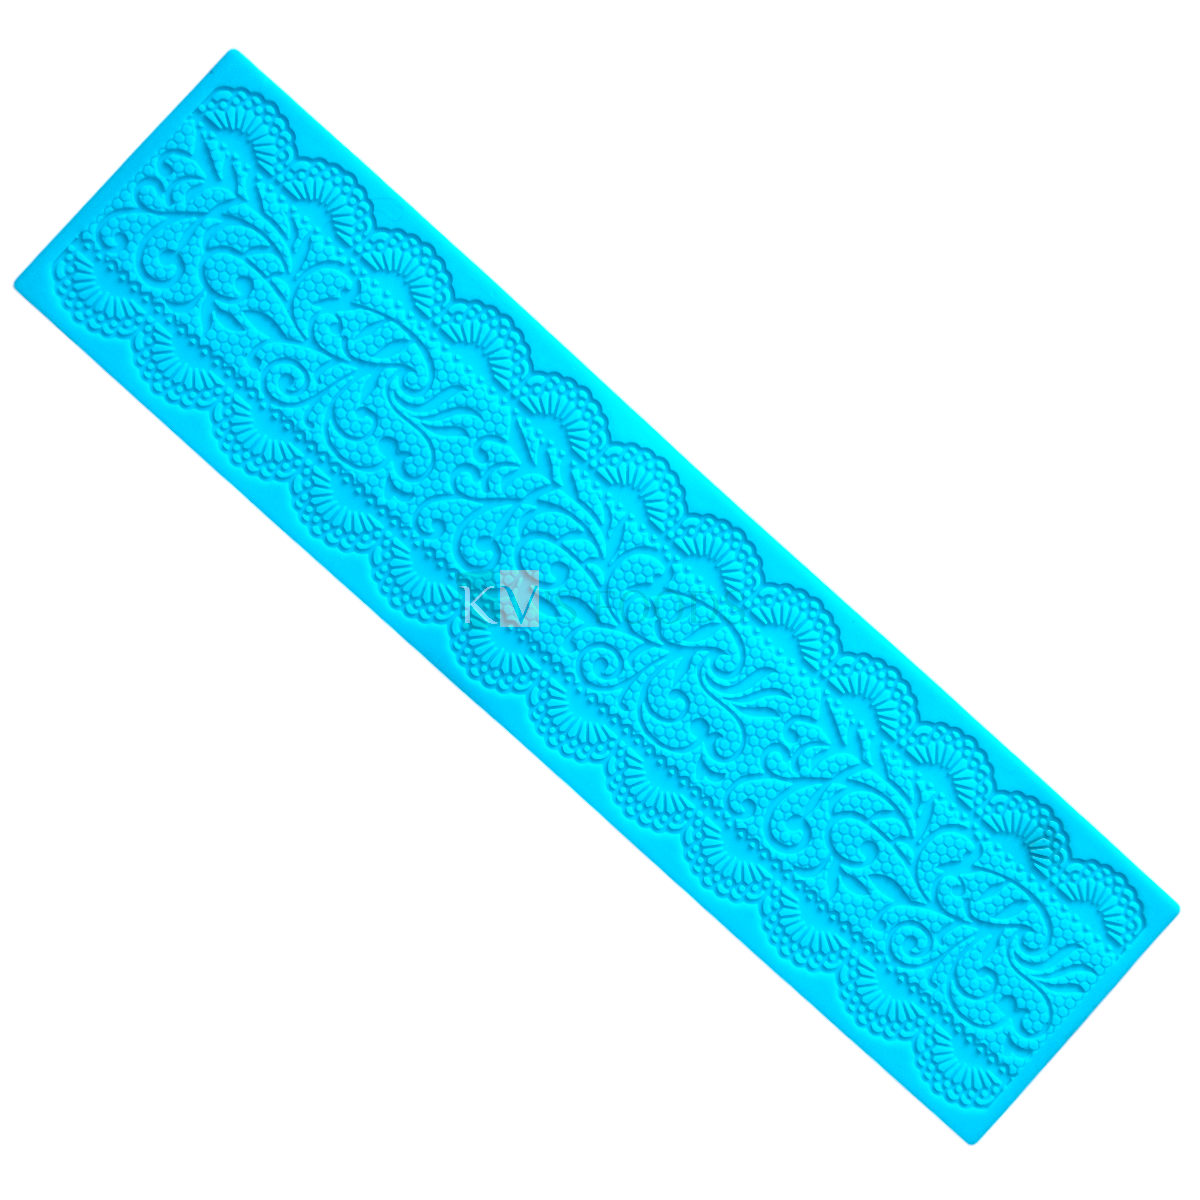 1 PC Blue Colour Silicone Lace Mat for Cake Border Theme Cake Mat Fondant Cake Decorating Mold Tools Sugar Lace Baking Mat DIY Embossing Pad for Birthday Cakes Chocolate Lace DIY Cake Decorations